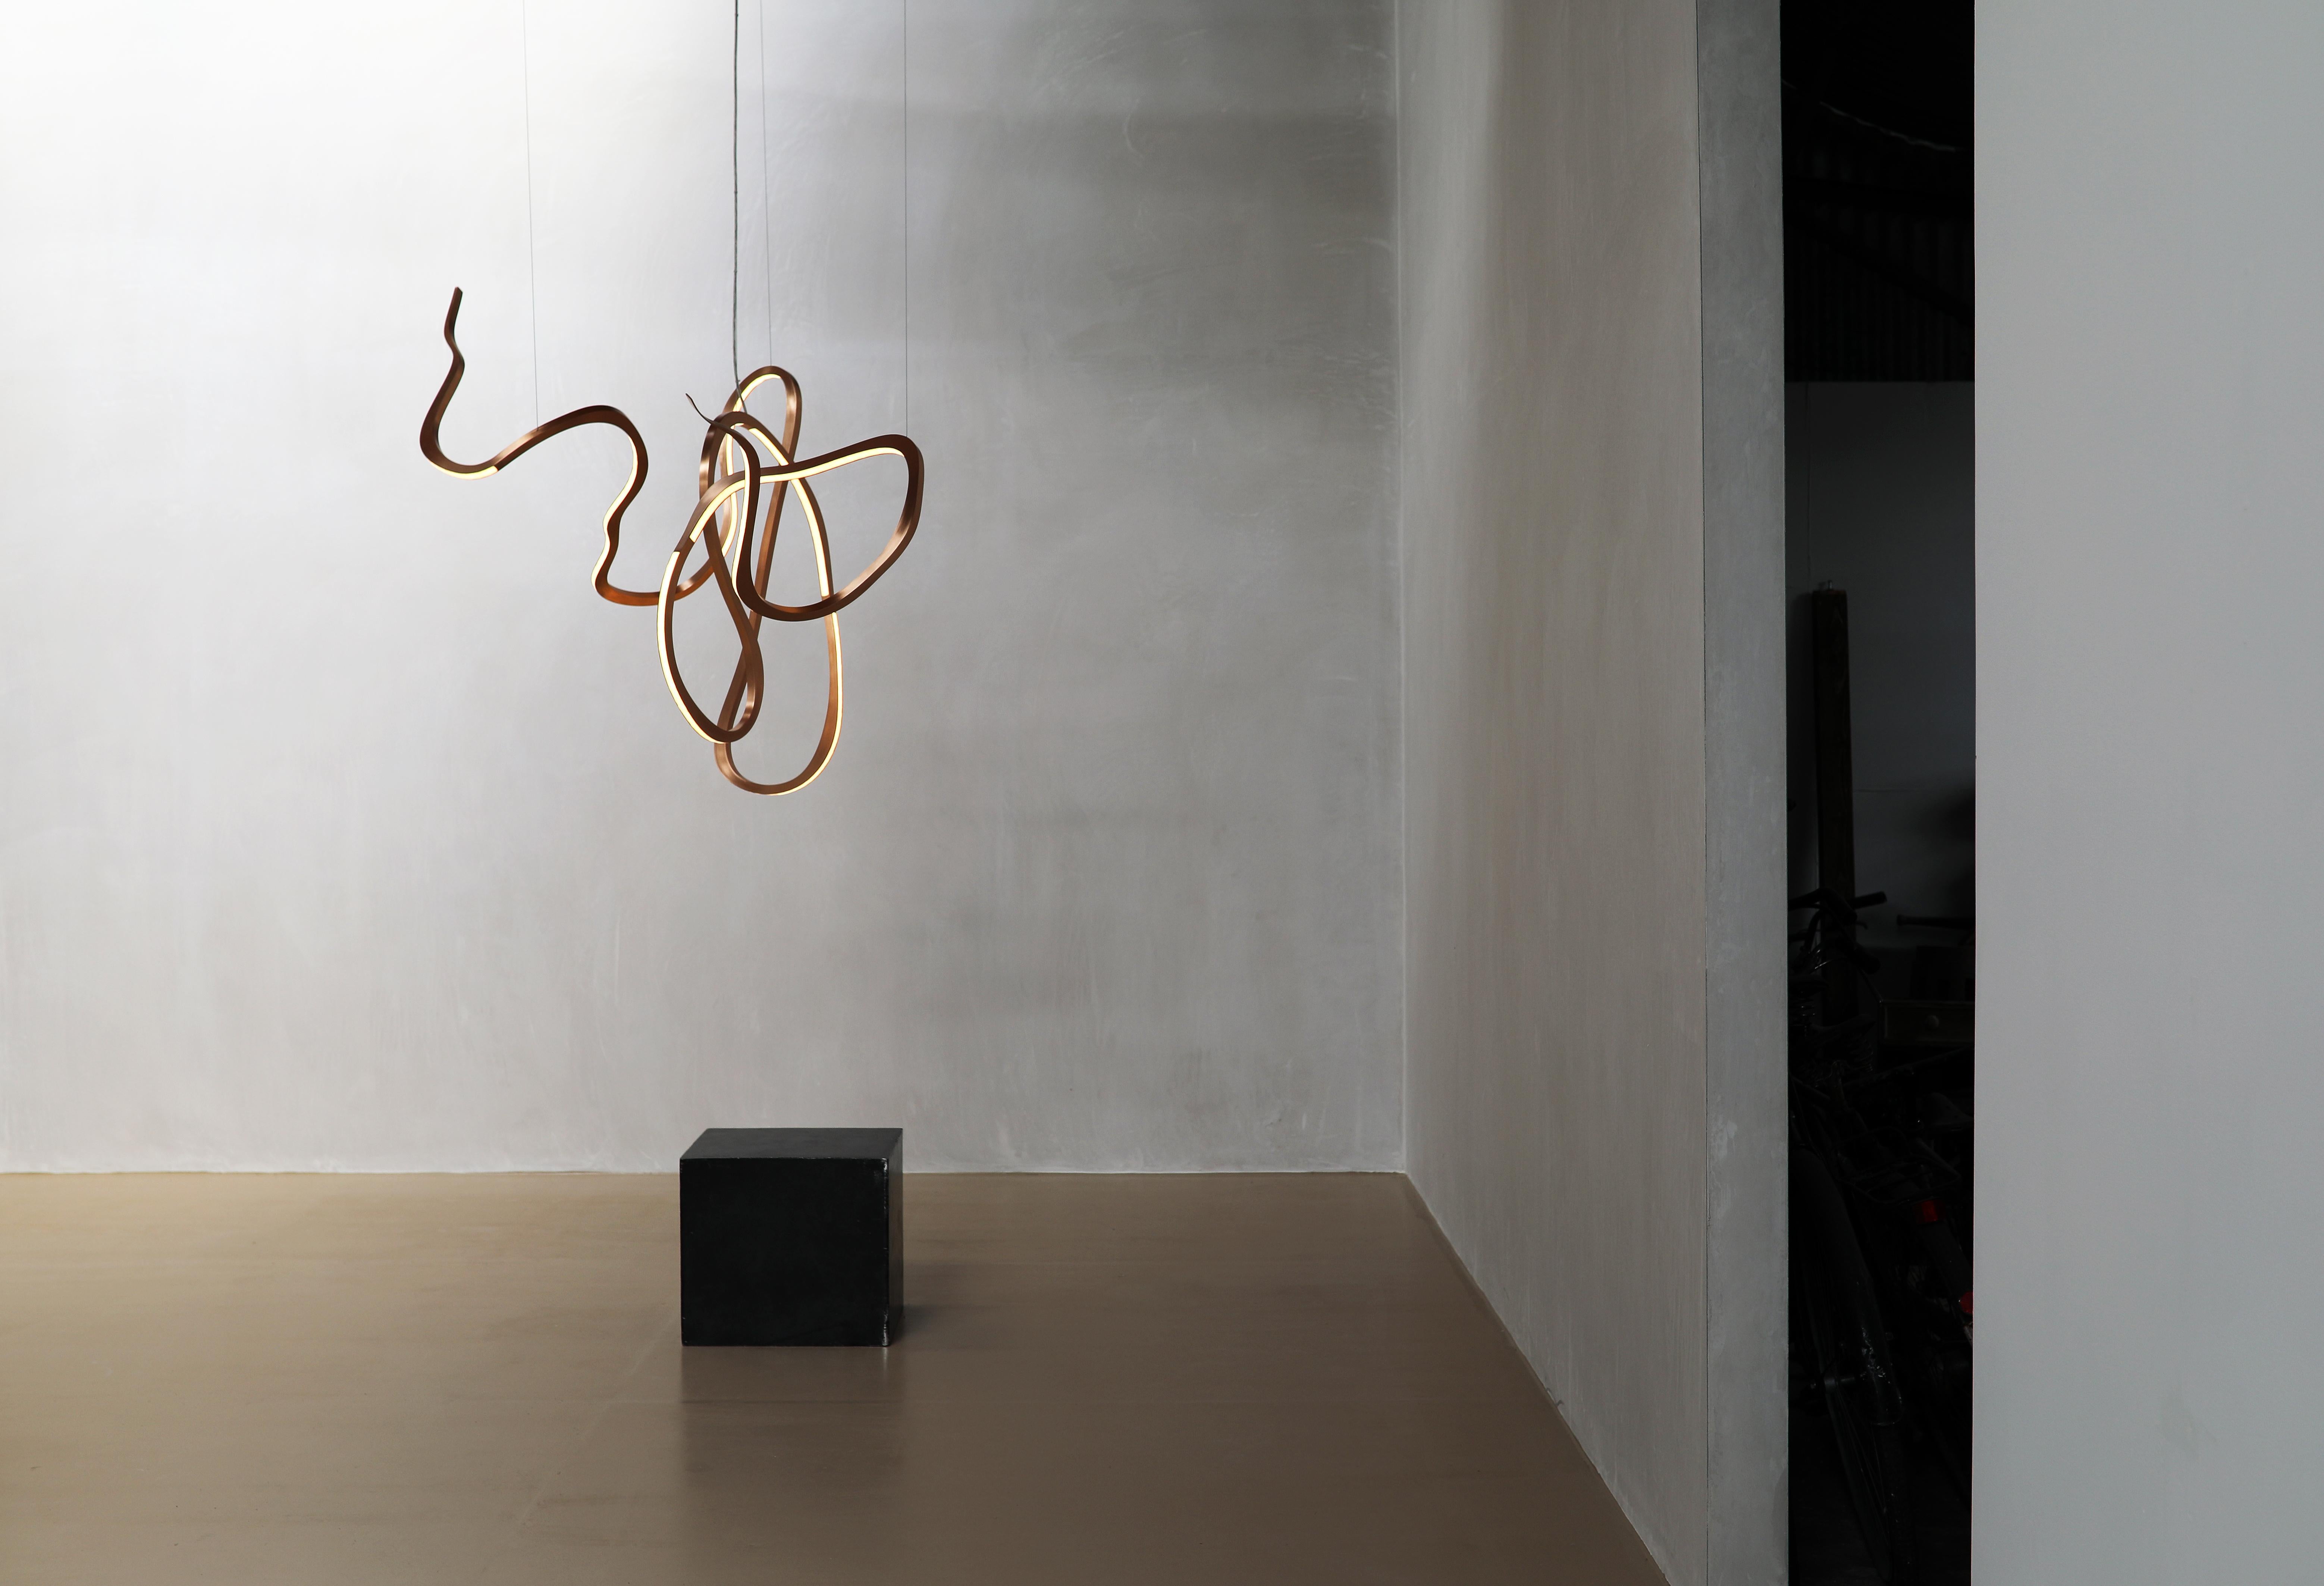 Niamh Barry, Artist's Hand IV, Suspended Light Sculpture, Ireland, 2020 For Sale 2